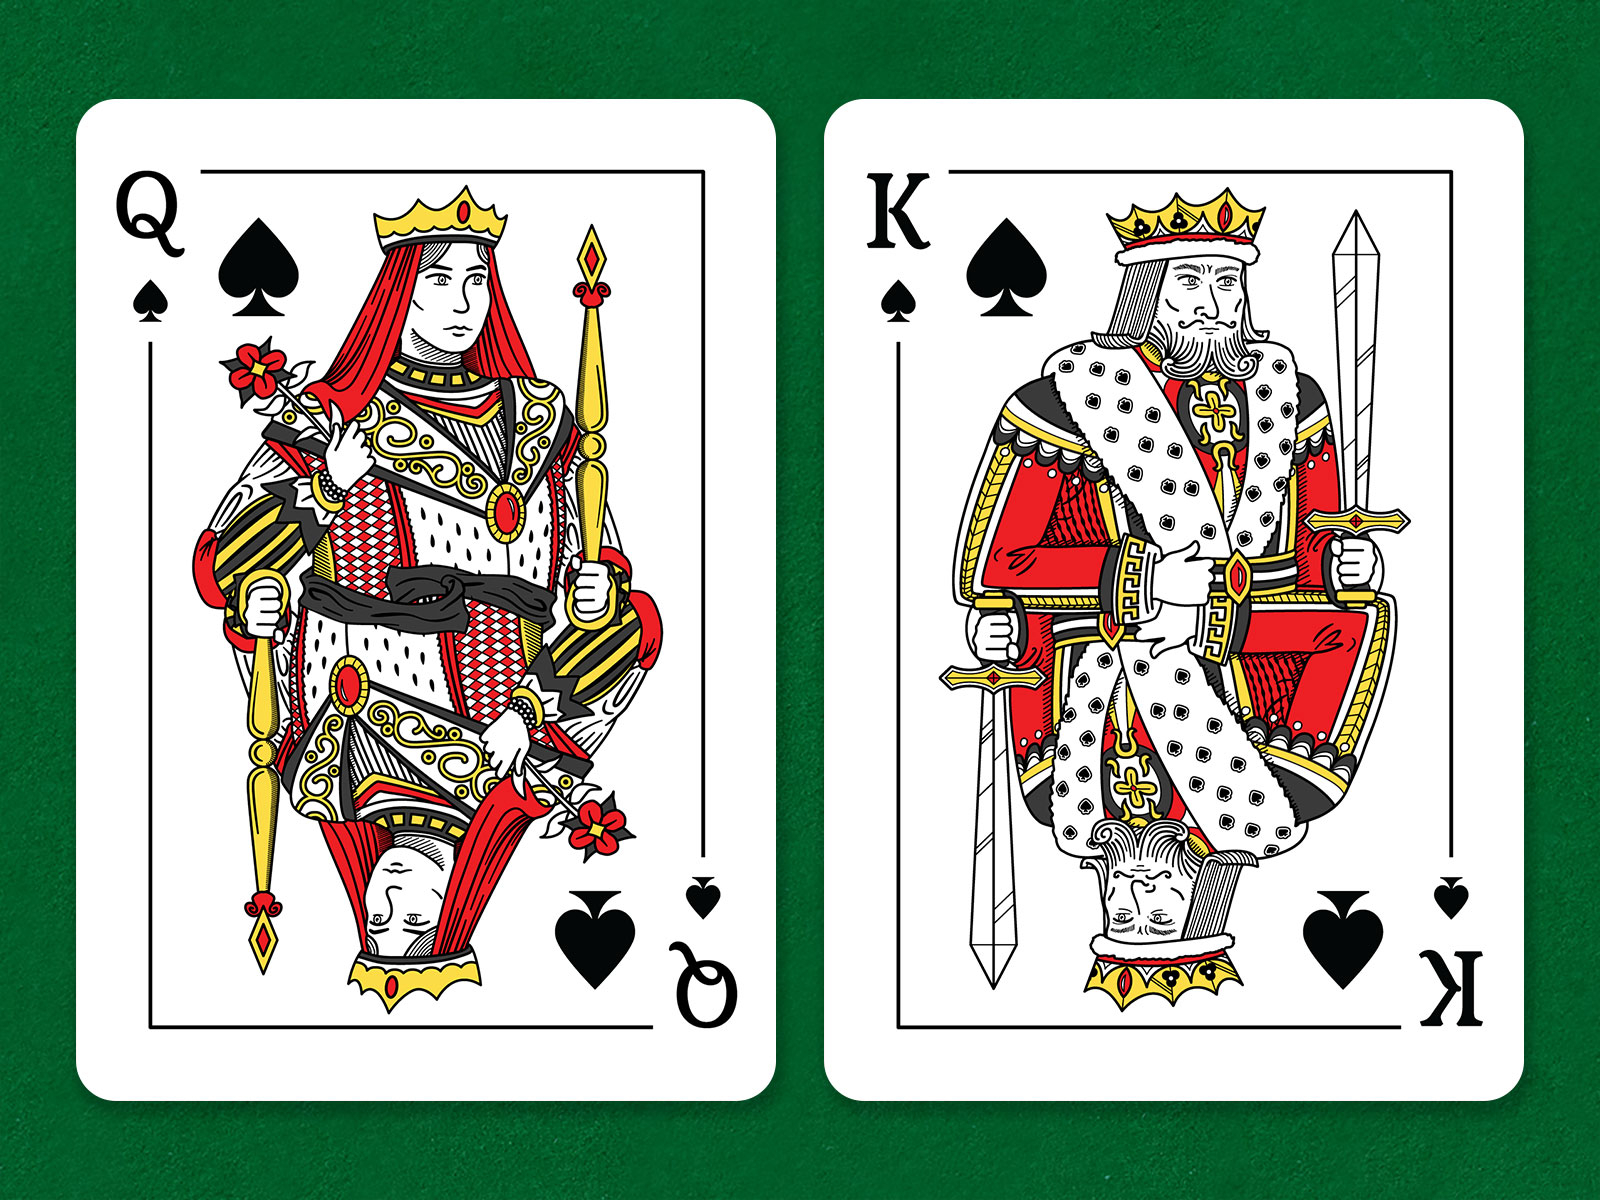 Queen and King of Spades by Tamara (Tammy) Stantic on Dribbble